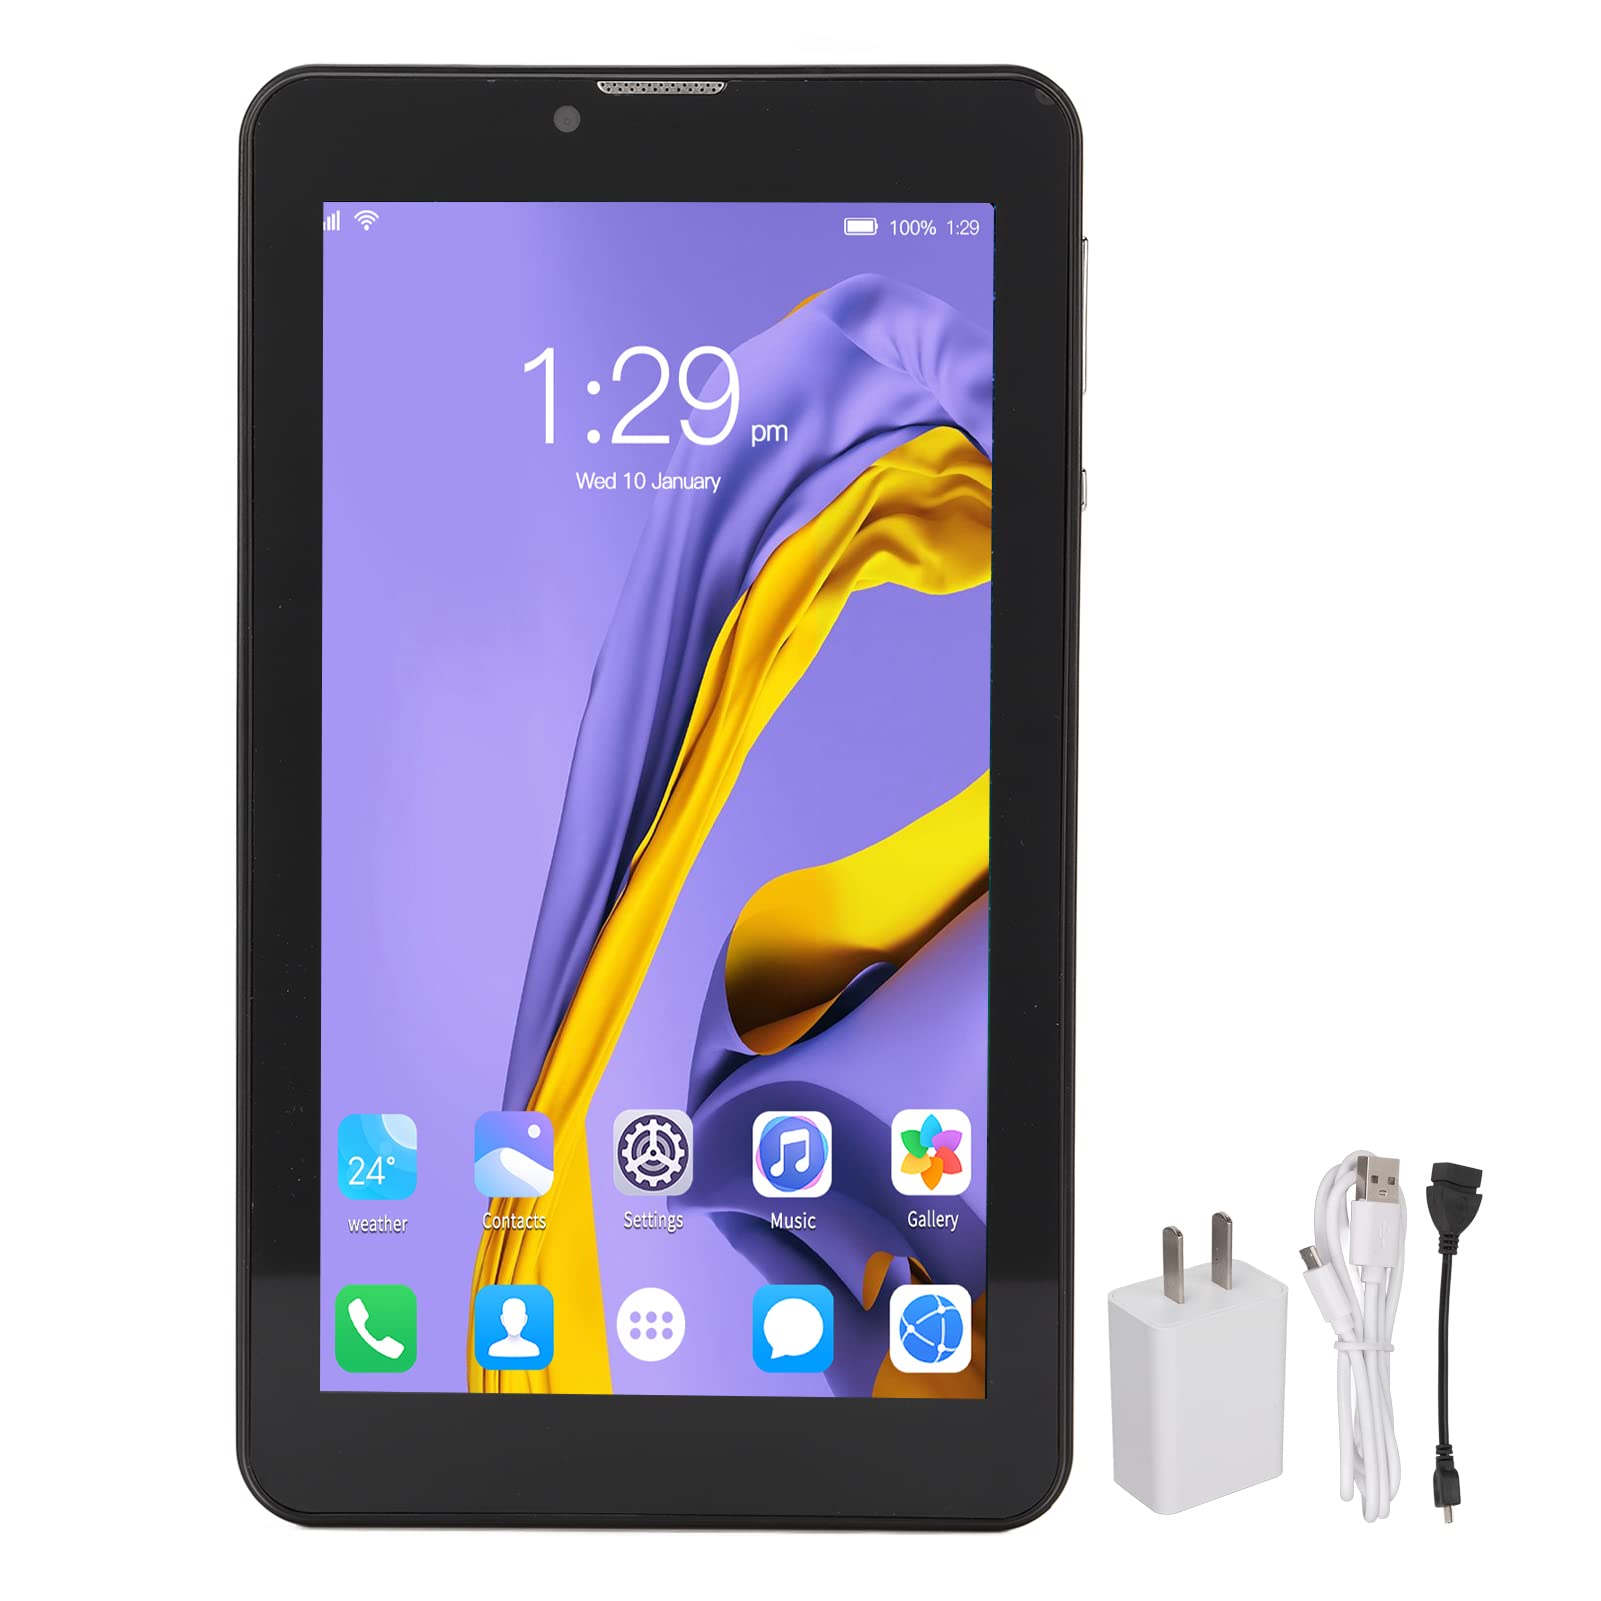 10 Tablet,7 Inch 1280x800 IPS HD Touch Screen,2G RAM 32G ROM,Octa Core Processor,5G WiFi Dual Band Tablet PC,3500 MAh Battery,2MP/5MP Camera (US Plug)